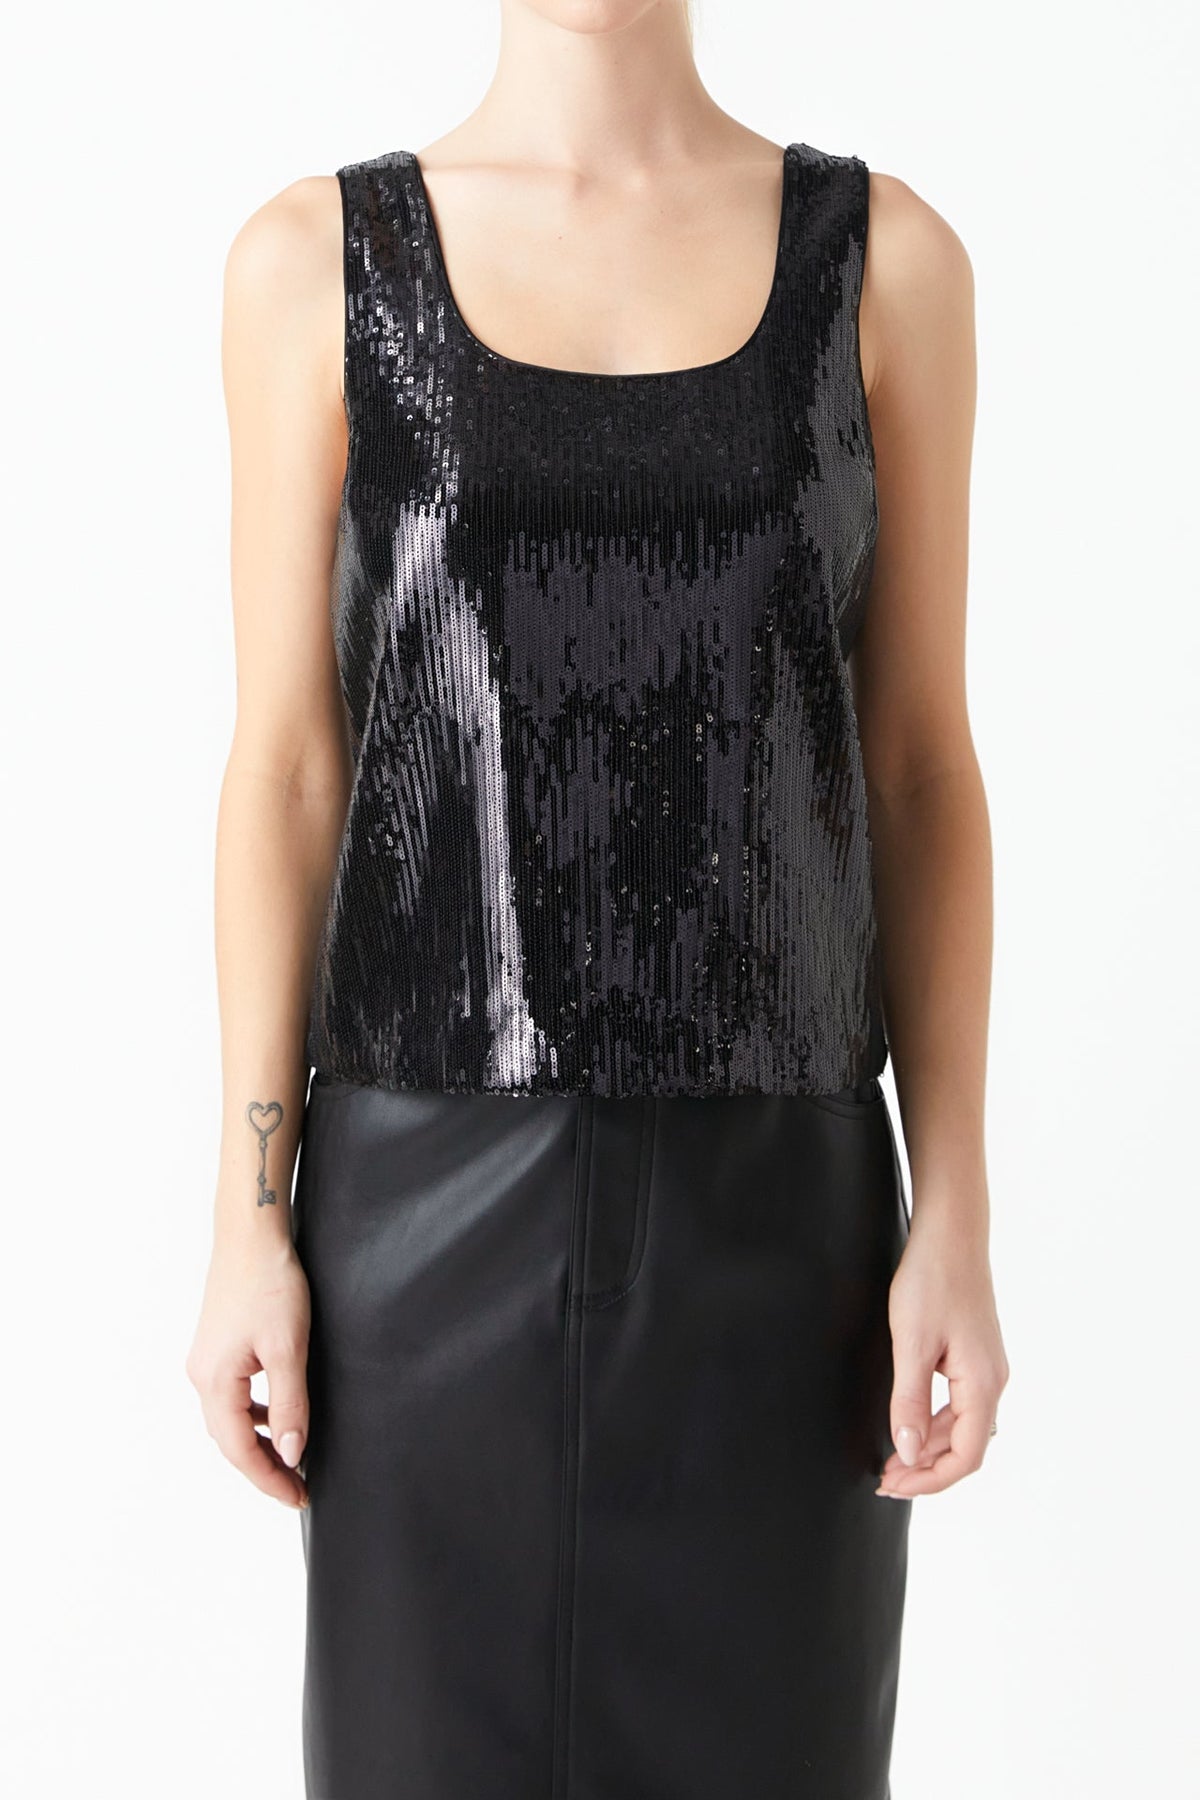 GREY LAB - Sequin Sleeveless Top - TOPS available at Objectrare